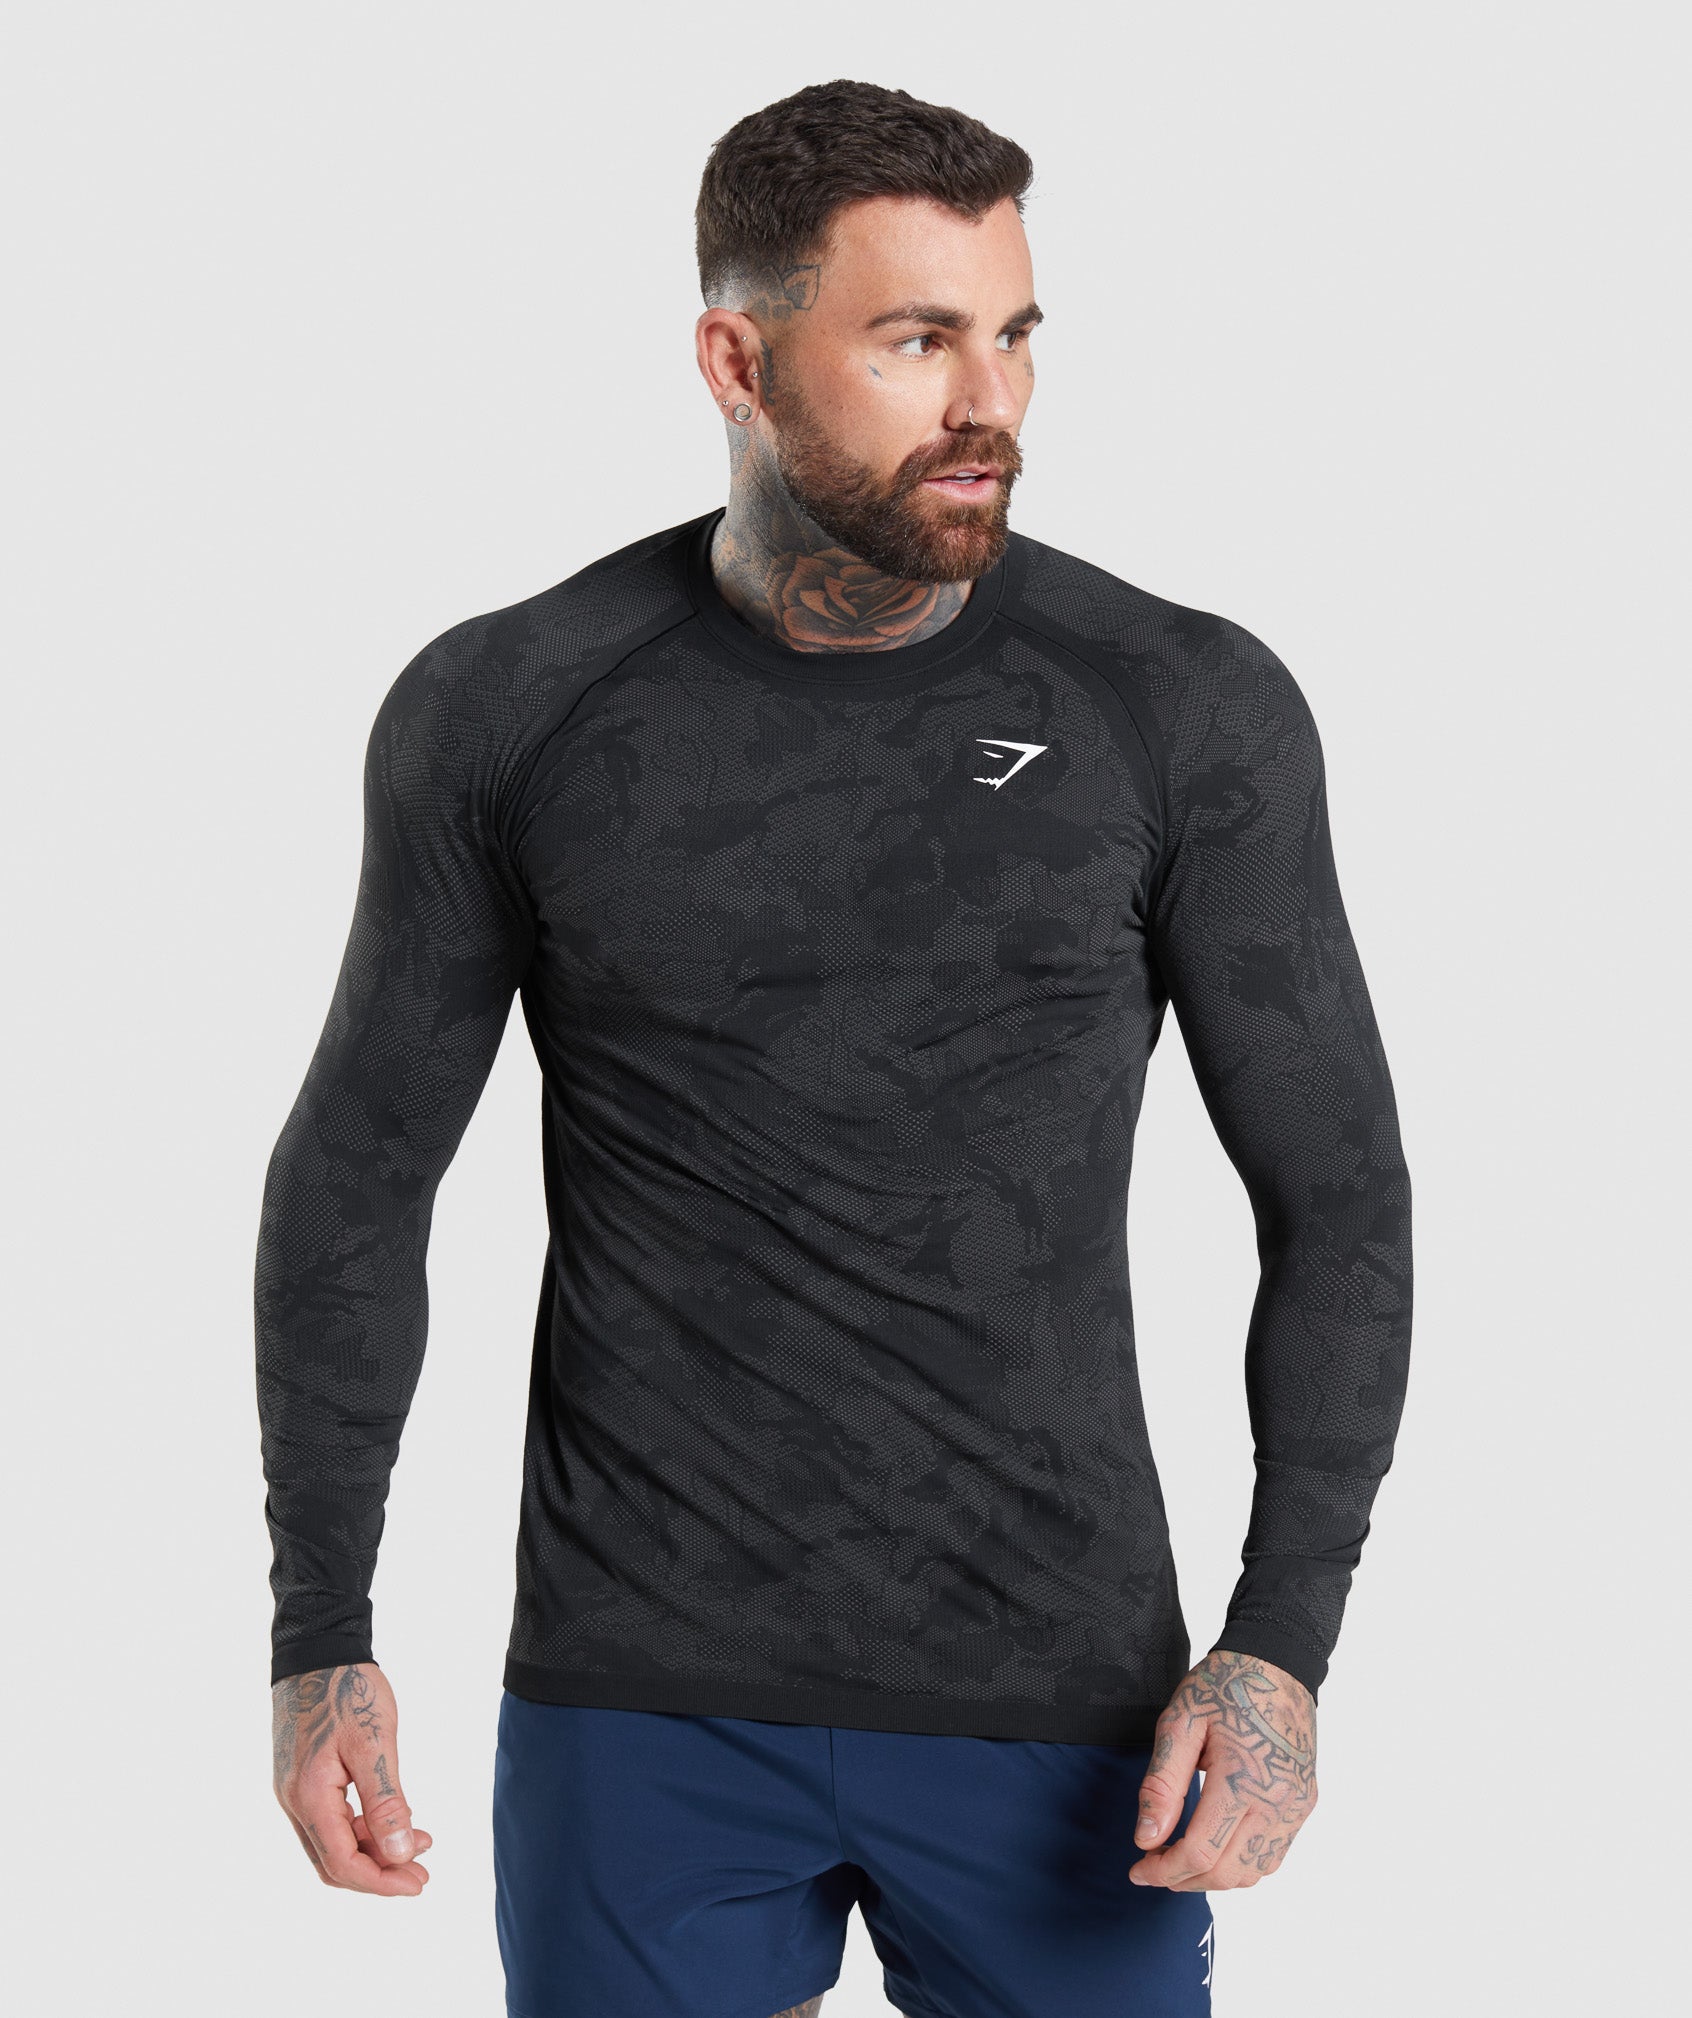 Gymshark slash up to 50% off fitness clothing and accessories in January  sale